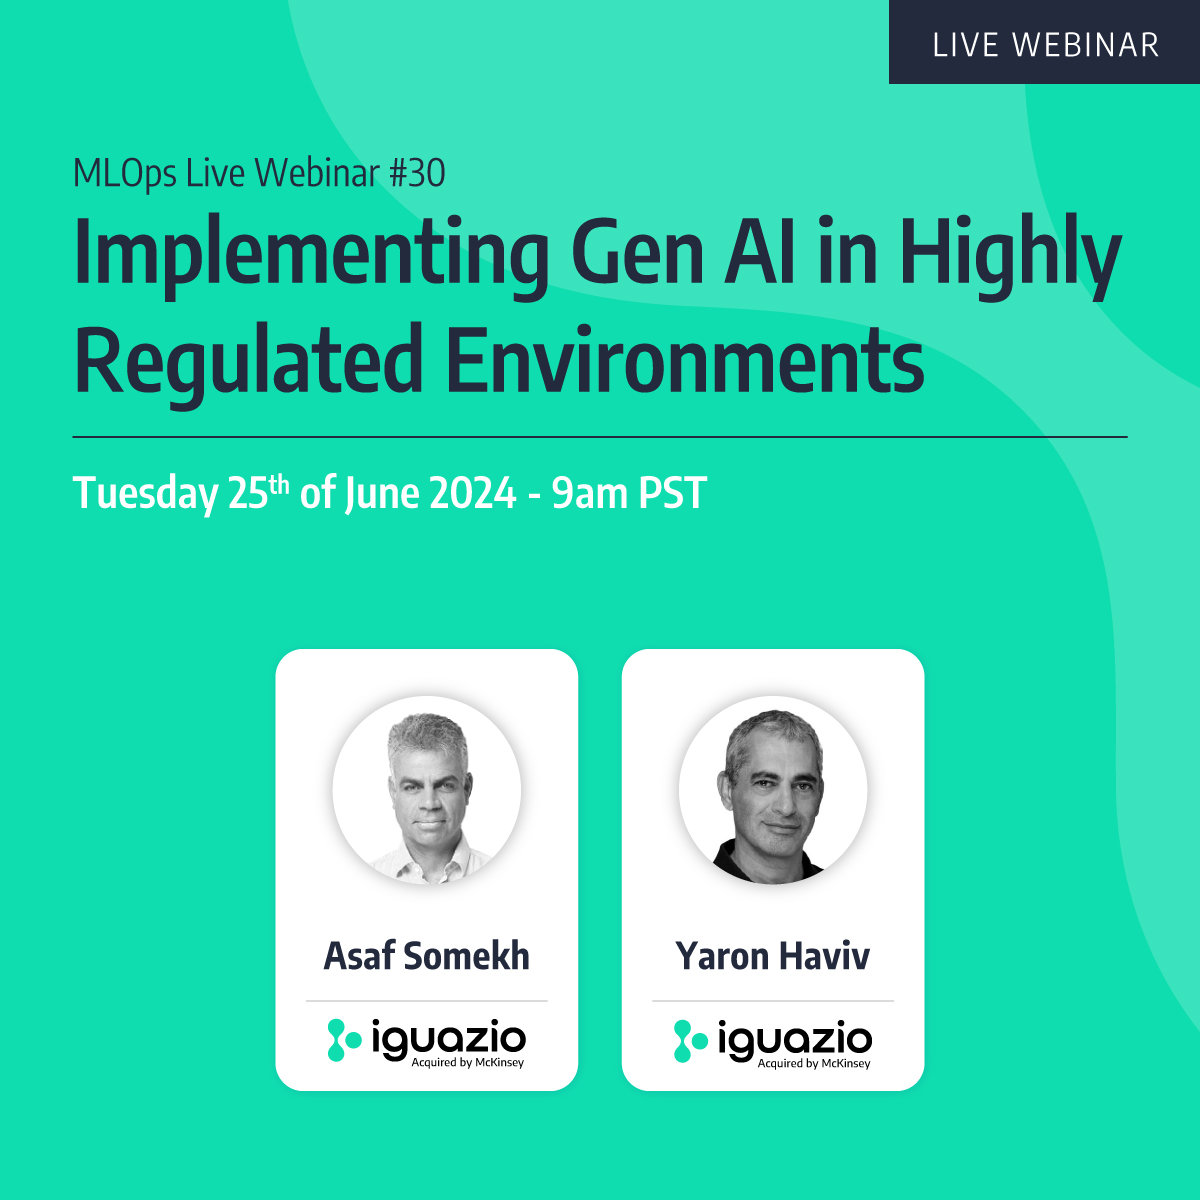 MLOPs Live #30 - Implementing Gen AI in Highly Regulated Environments